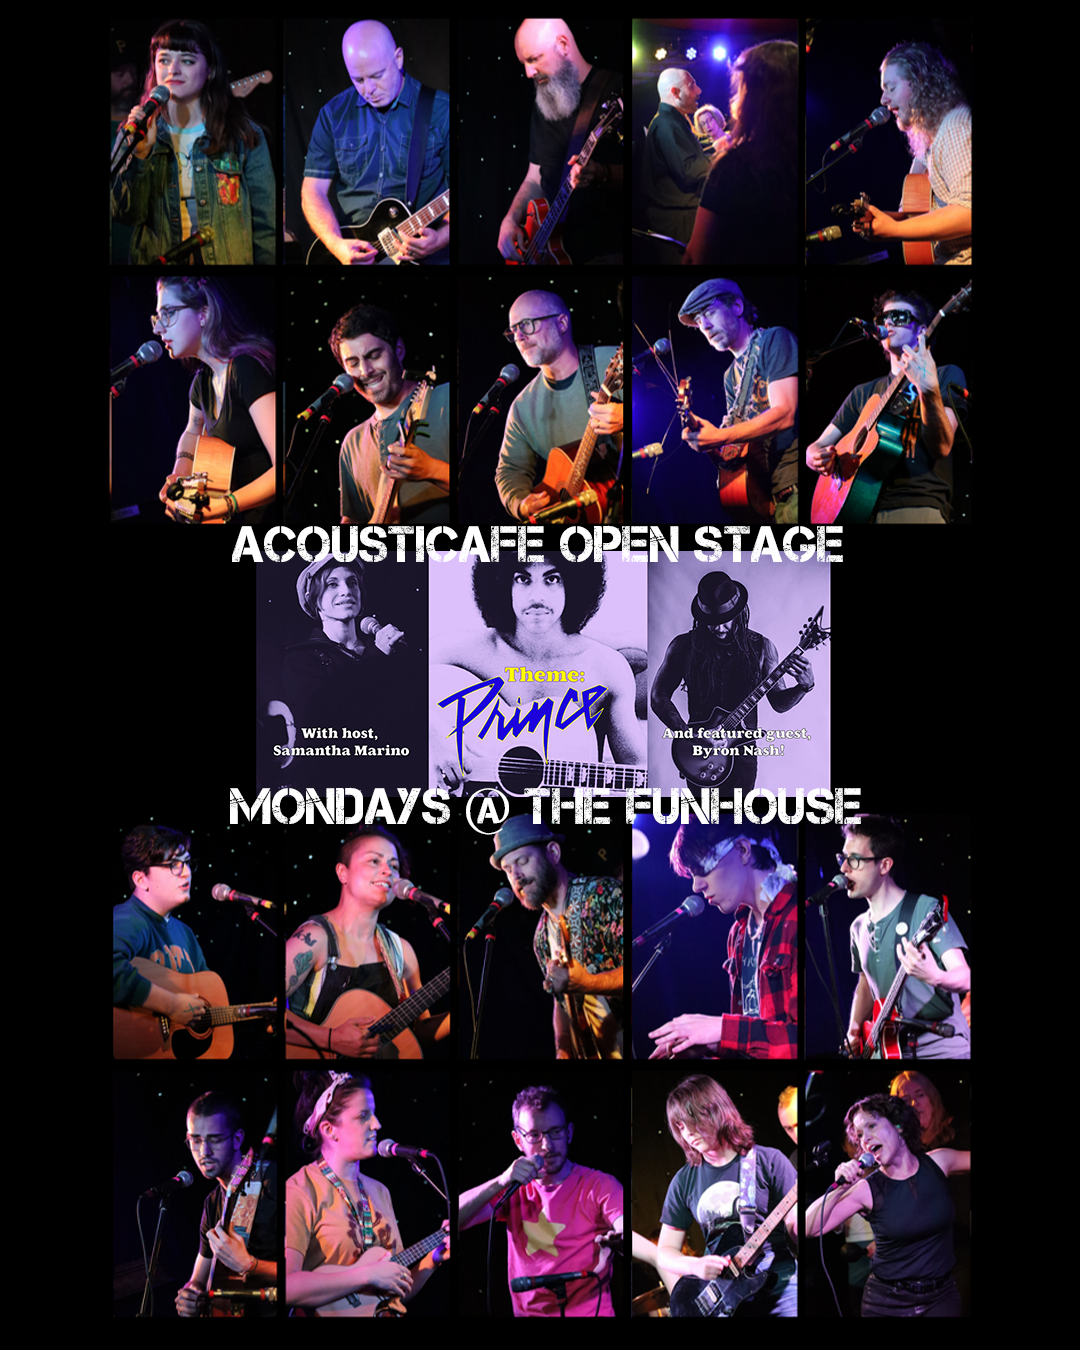 AcoustiCafe Mondays at The Funhouse at Mr Smalls!